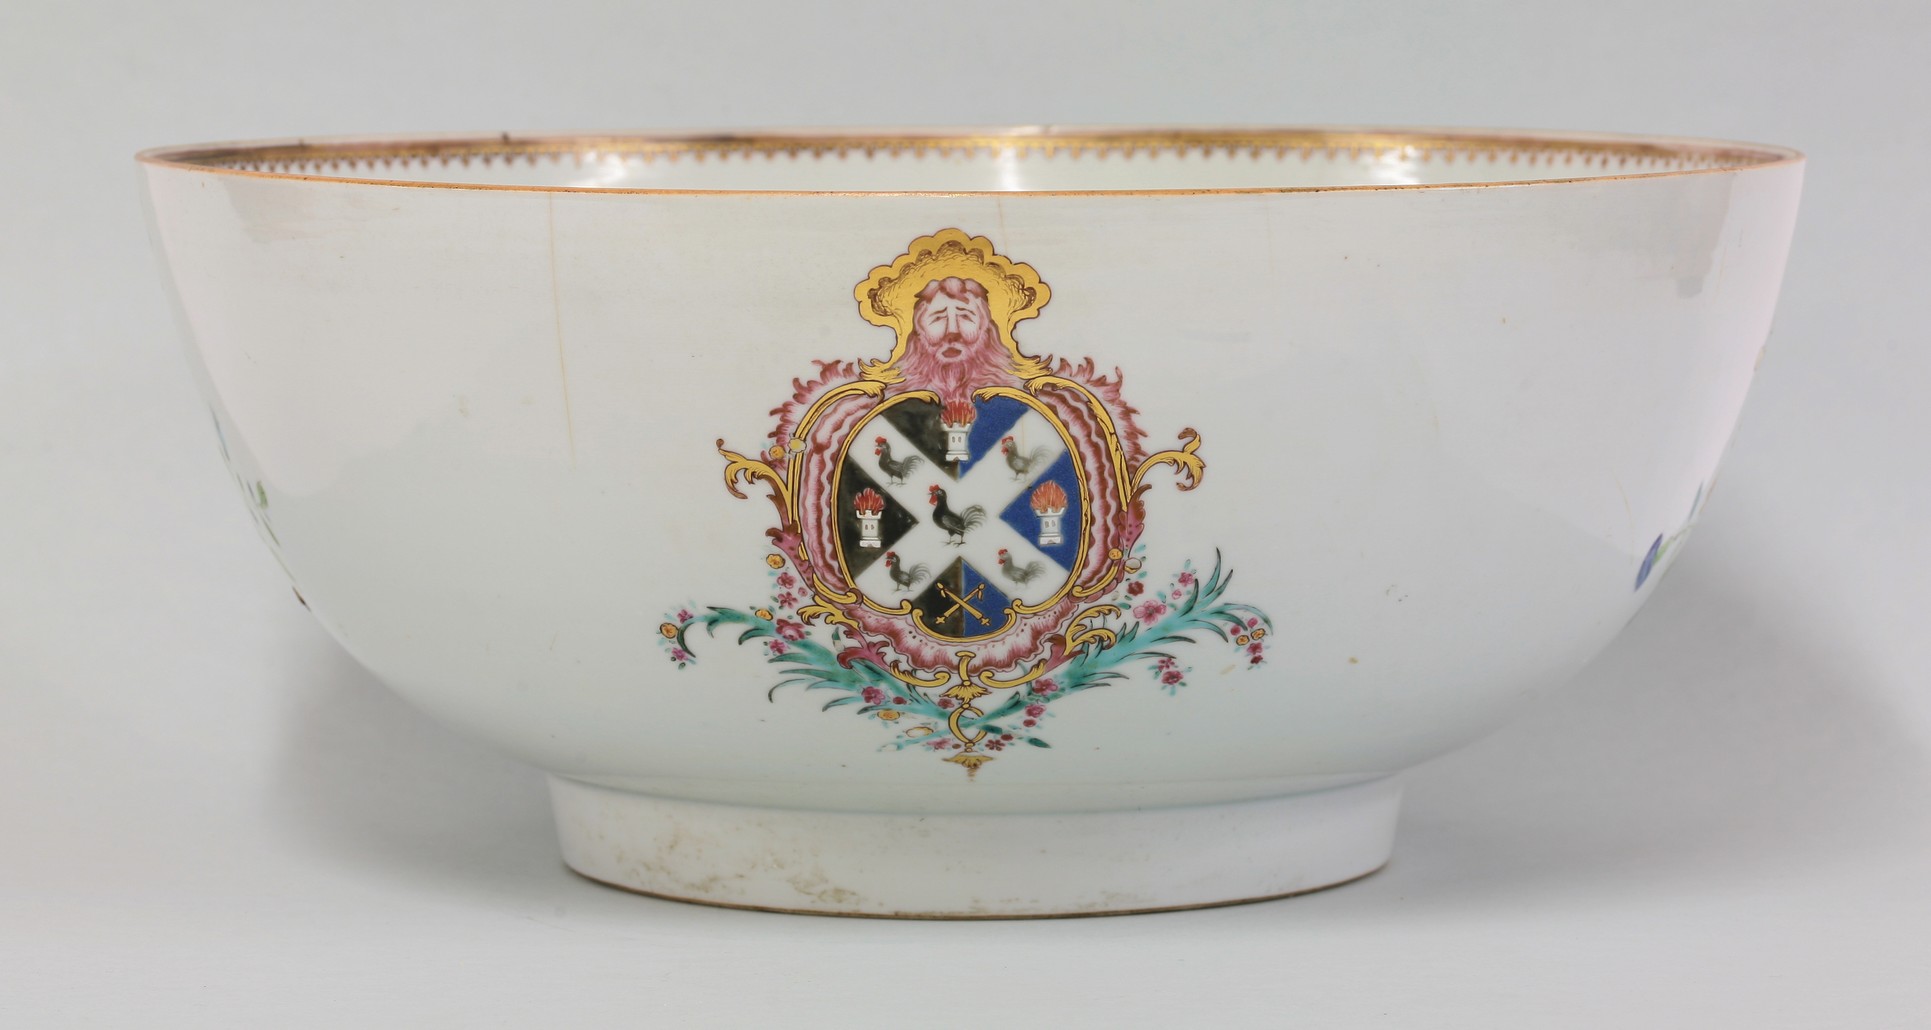 A large Punch Bowl,
third quarter 18th century, enamelled and gilt with arms, possibly